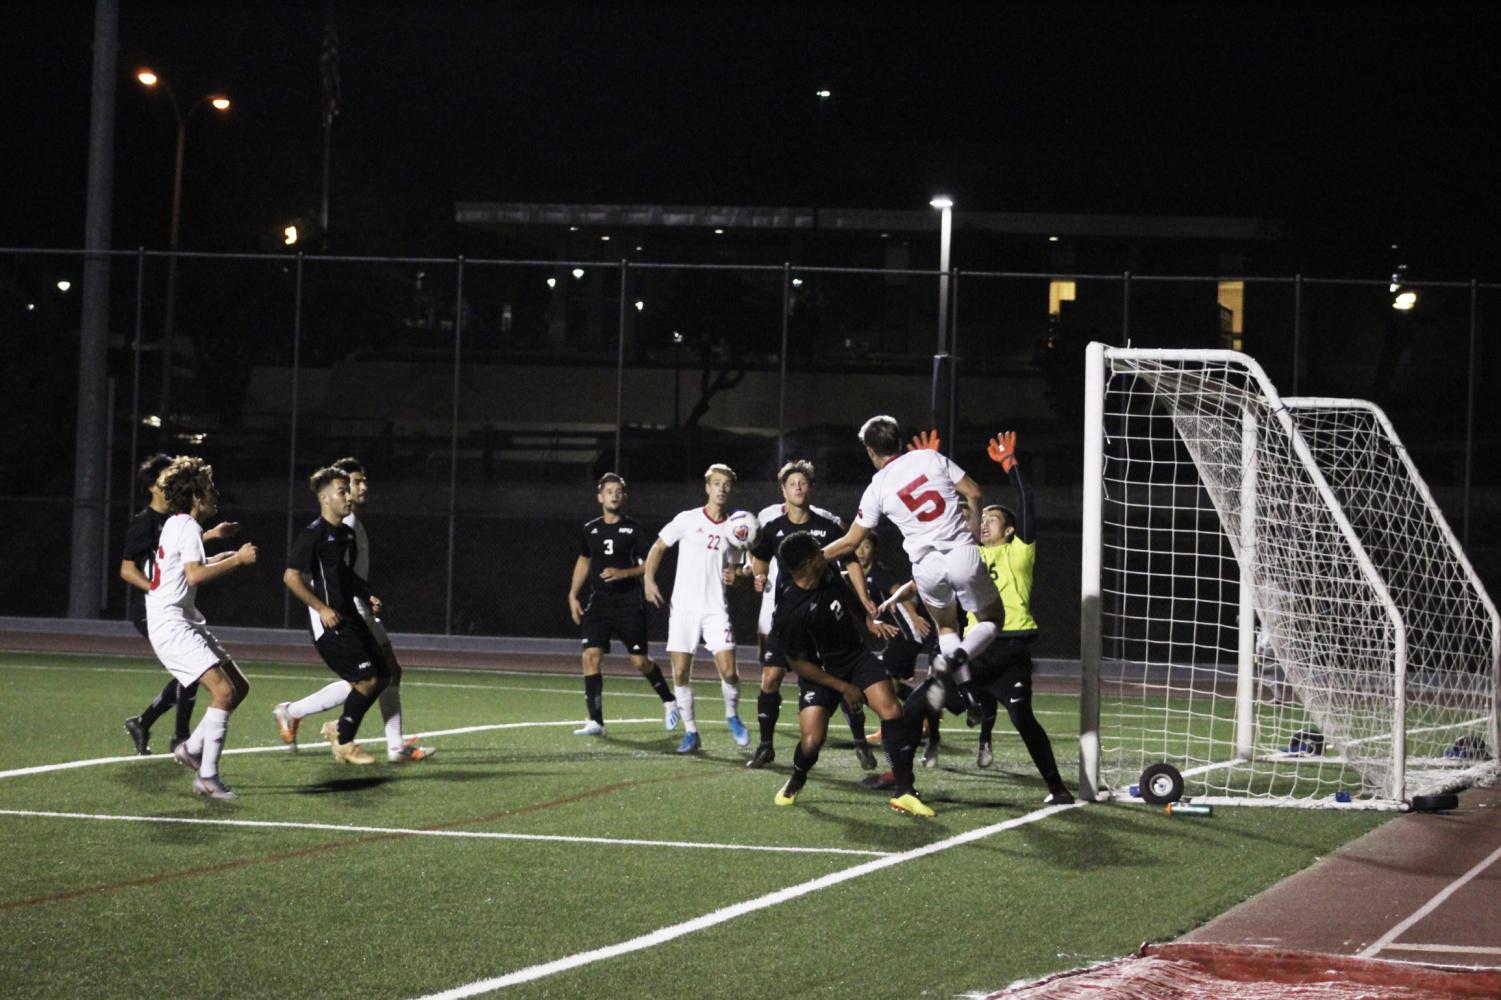 Biola mens soccer team scores their first goal in their game against Hawaii Pacific University on October 28, 2019.  